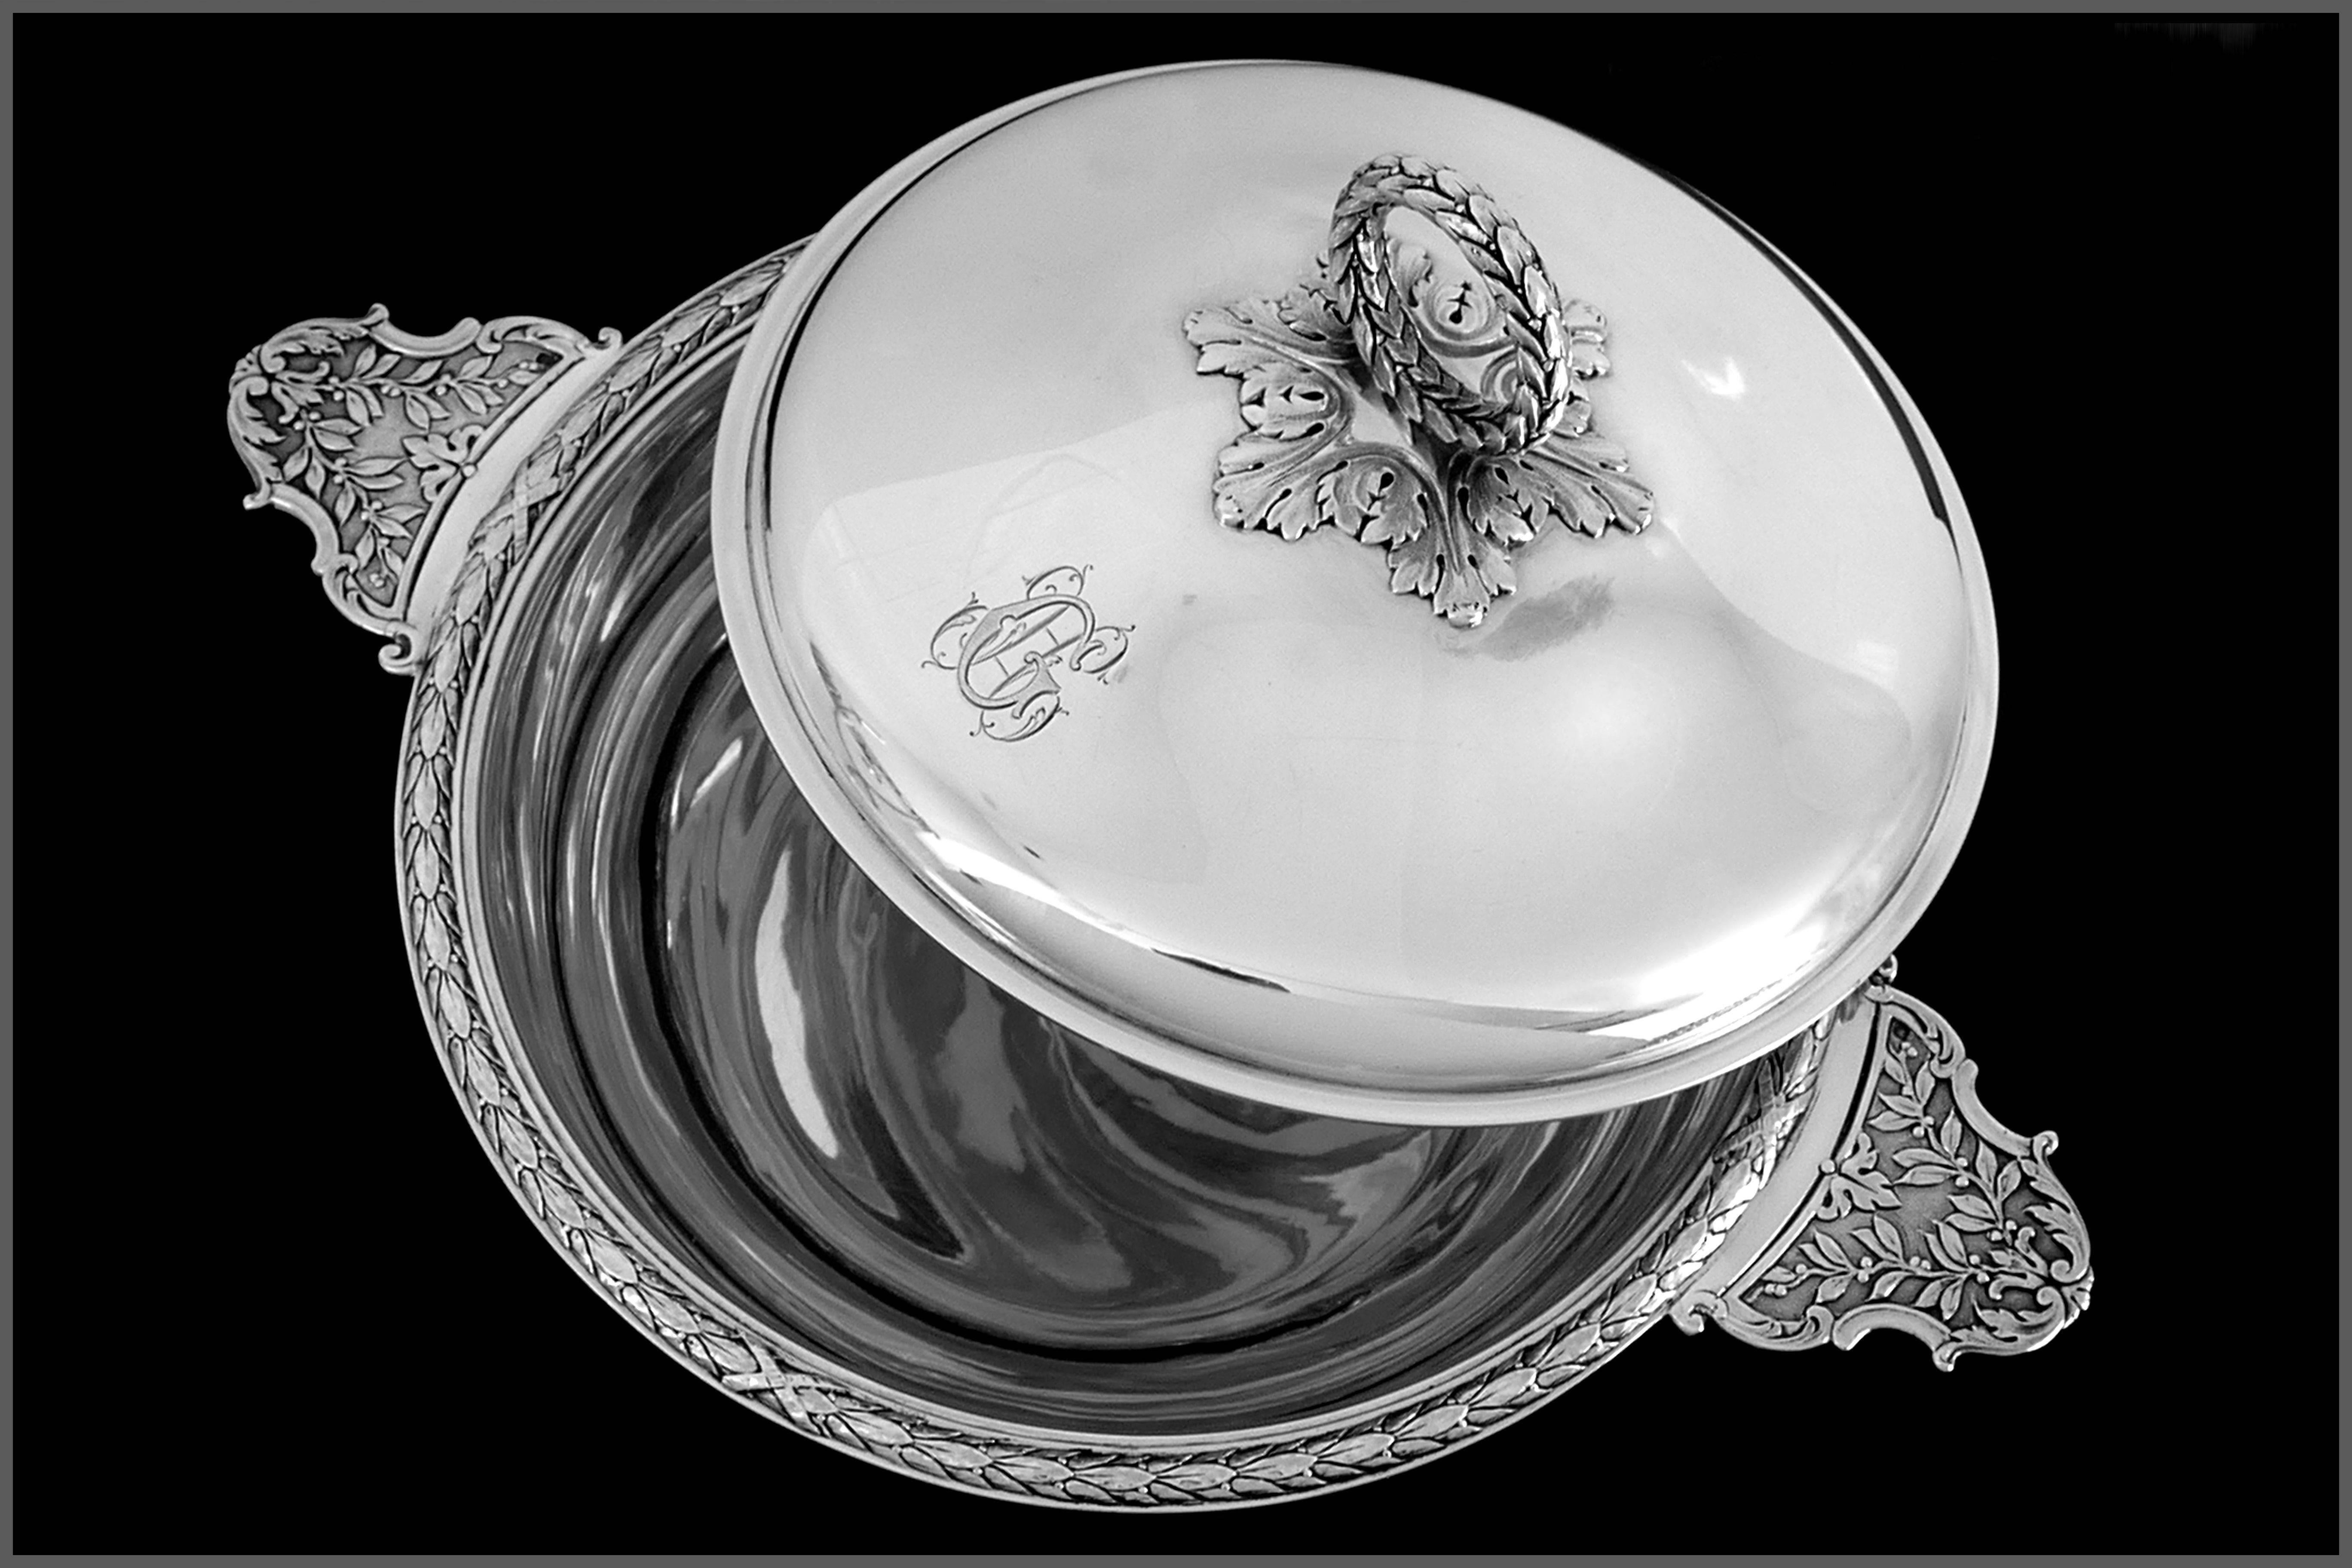 Late 19th Century Lapeyre French Sterling Silver Ecuelle Covered Serving Dish/Tureen Neoclassical